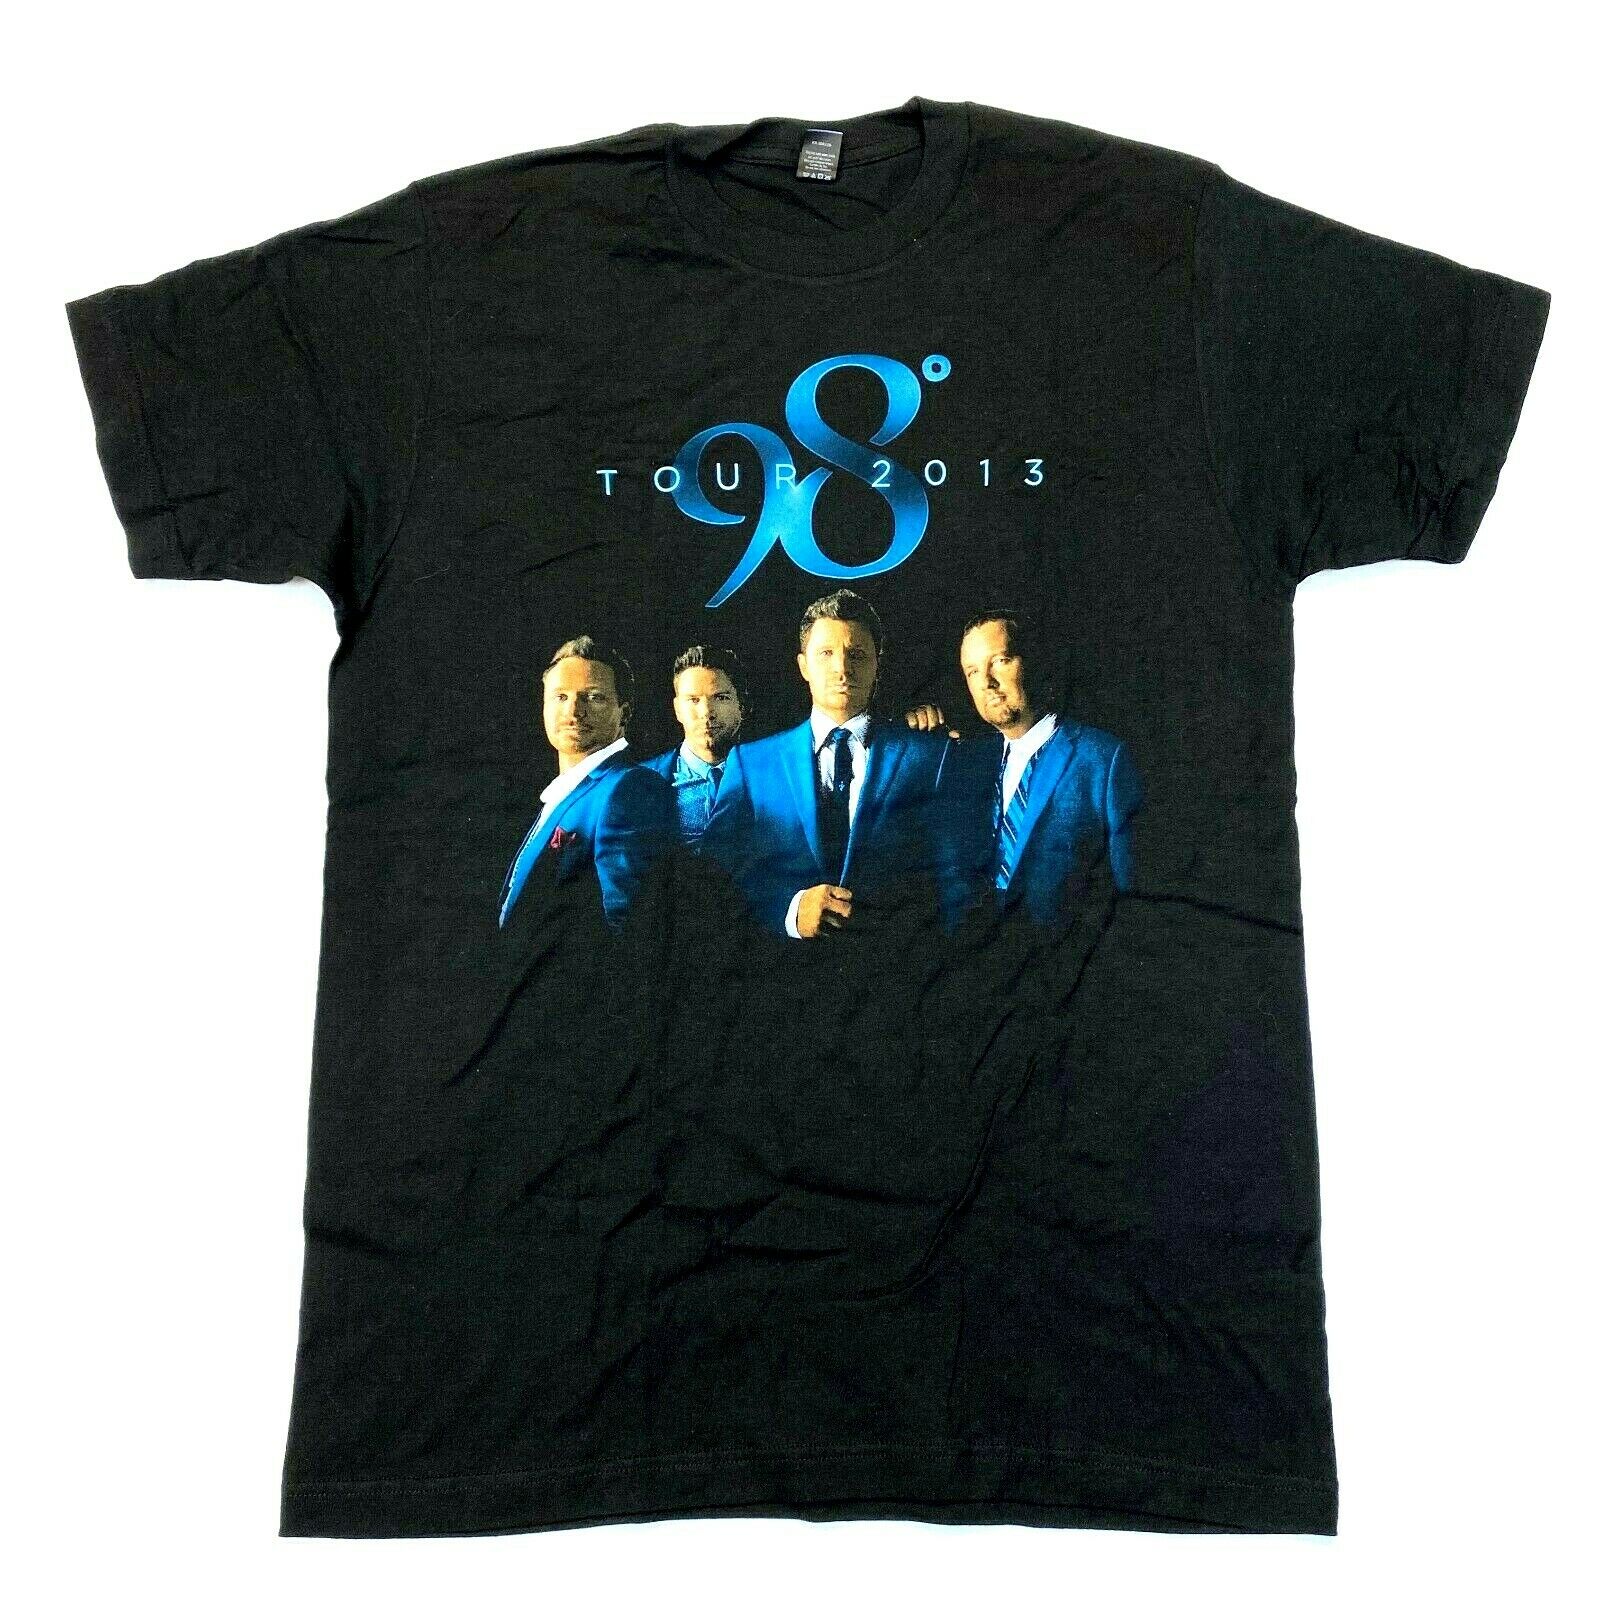 98 Degrees Band Photo 2013 The Package Tour Tee Tultex T-shirt - Black - M